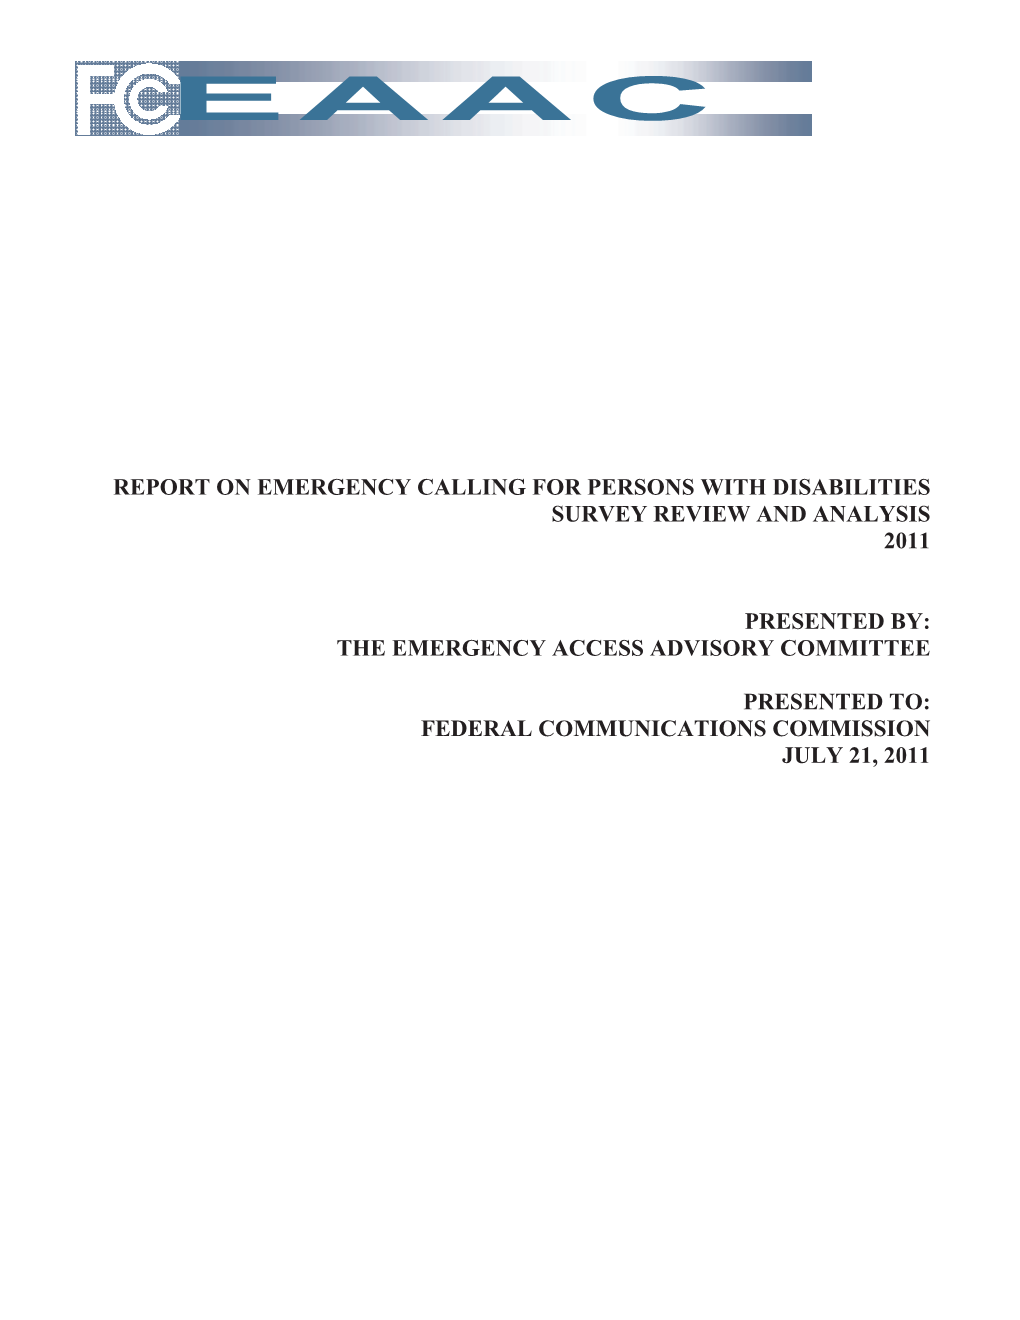 Report on Emergency Calling for Persons with Disabilities Survey Review and Analysis 2011